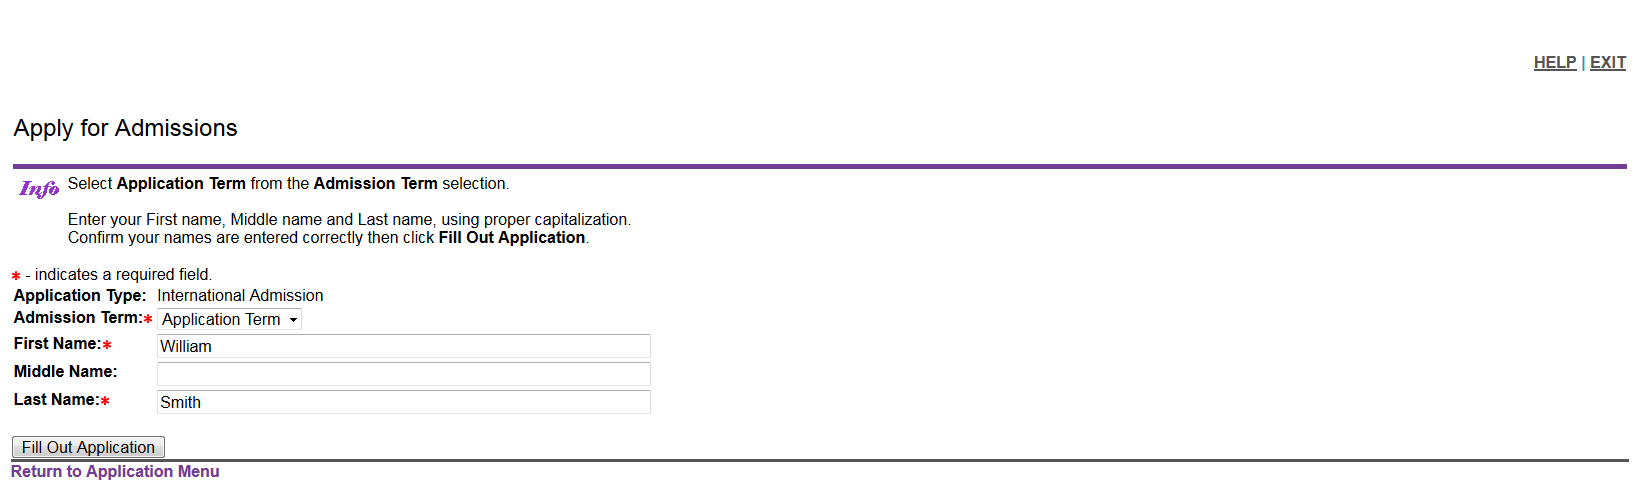 The "Apply for Admissions" page, that includes fields such as admission term, first name, middle name, and last name